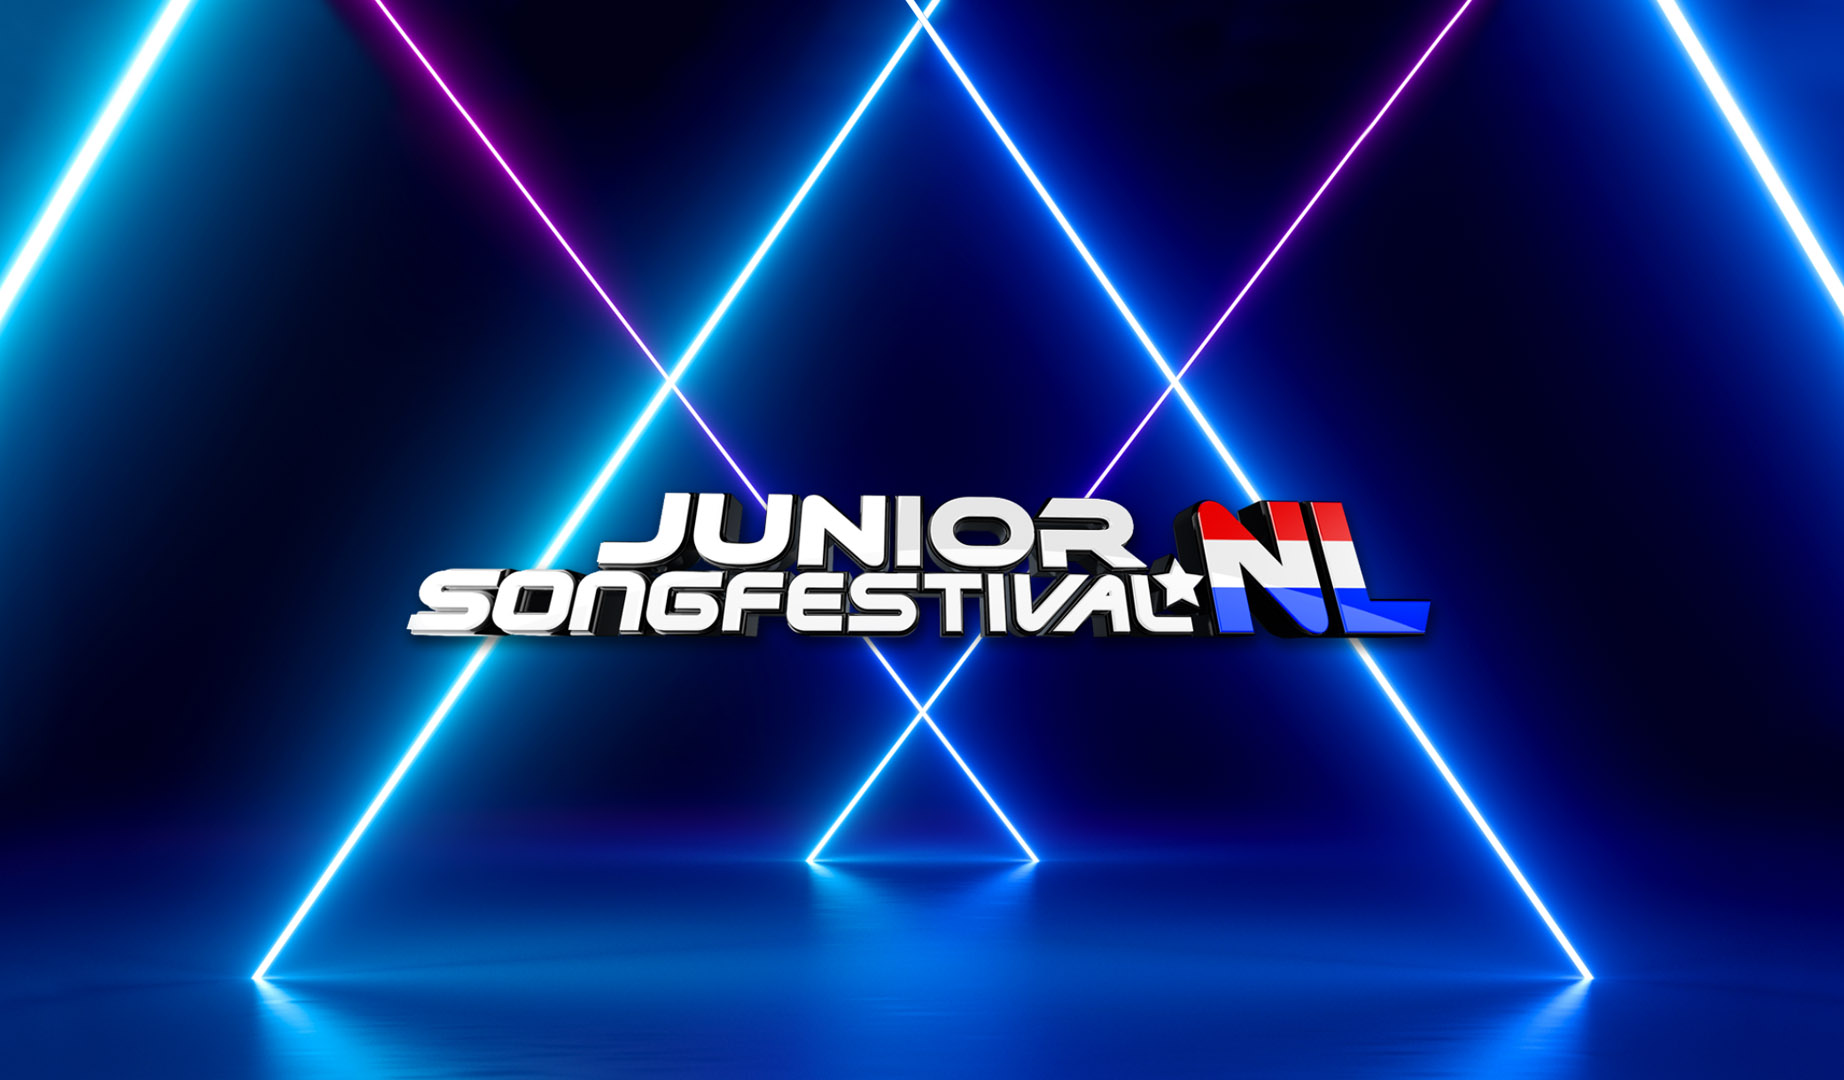 The Netherlands: Meet the four acts that will compete at Junior Songfestival 2021